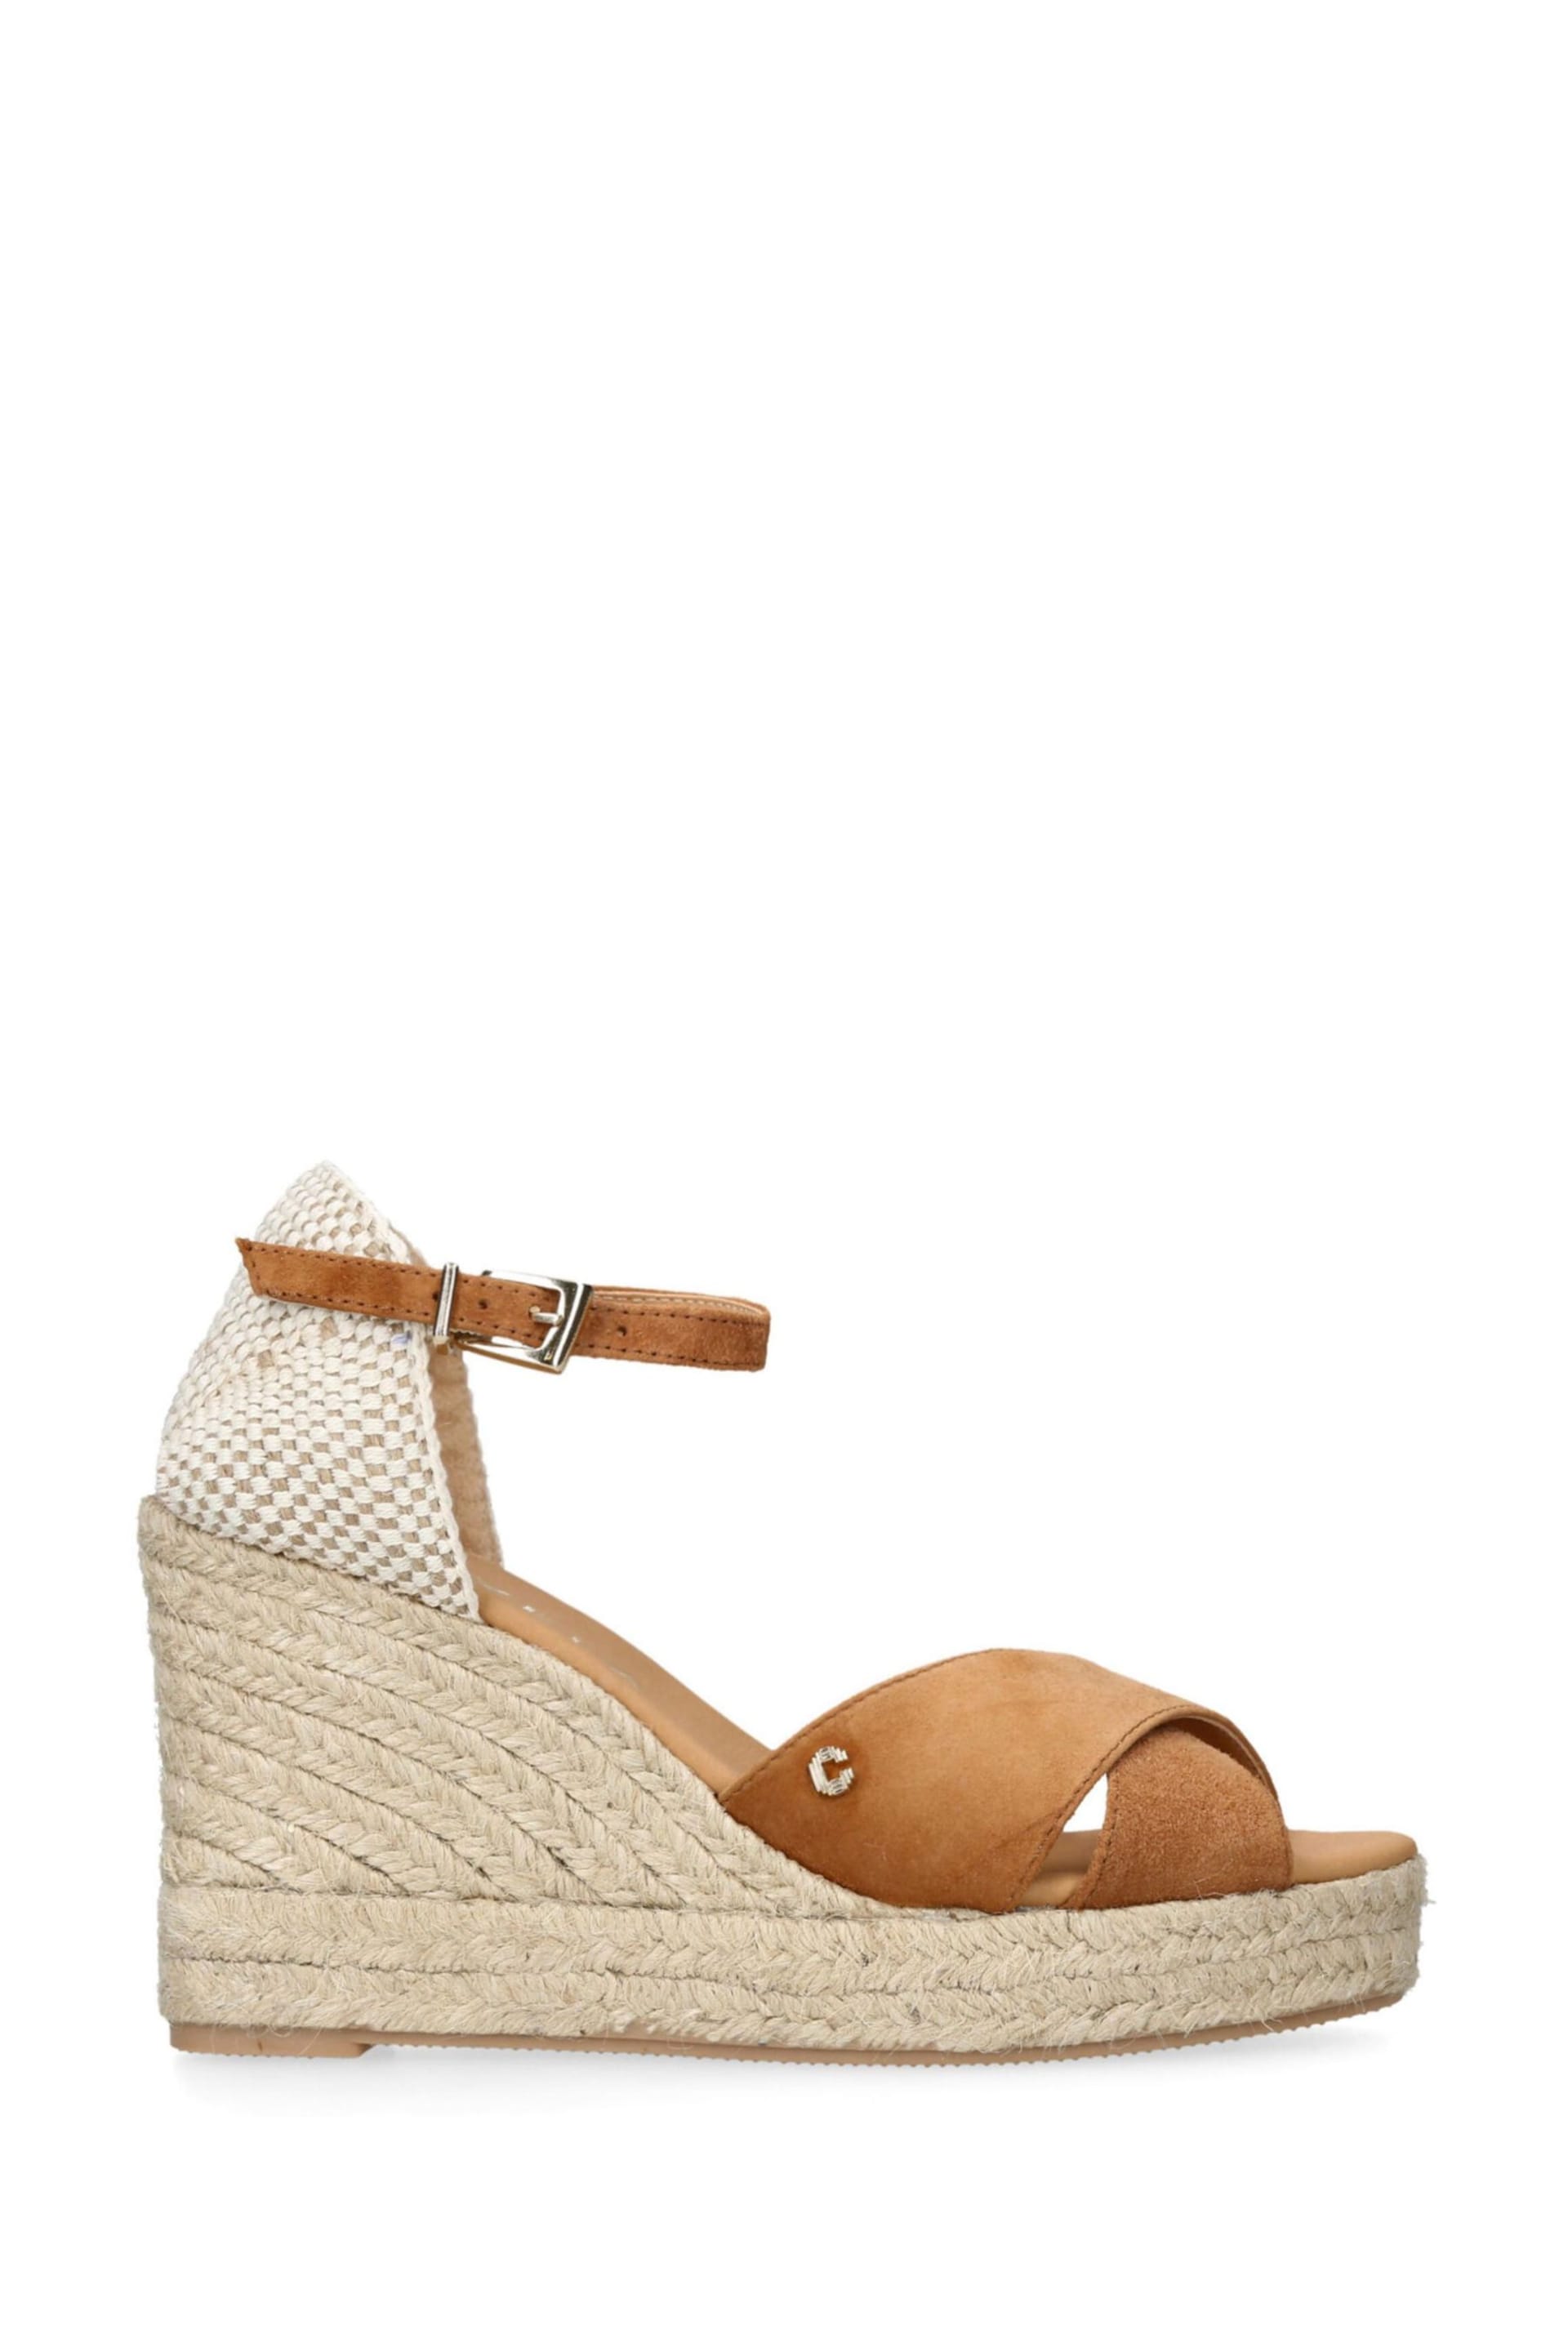 Carvela Comfort Natural Sun Ray Sandals - Image 1 of 5